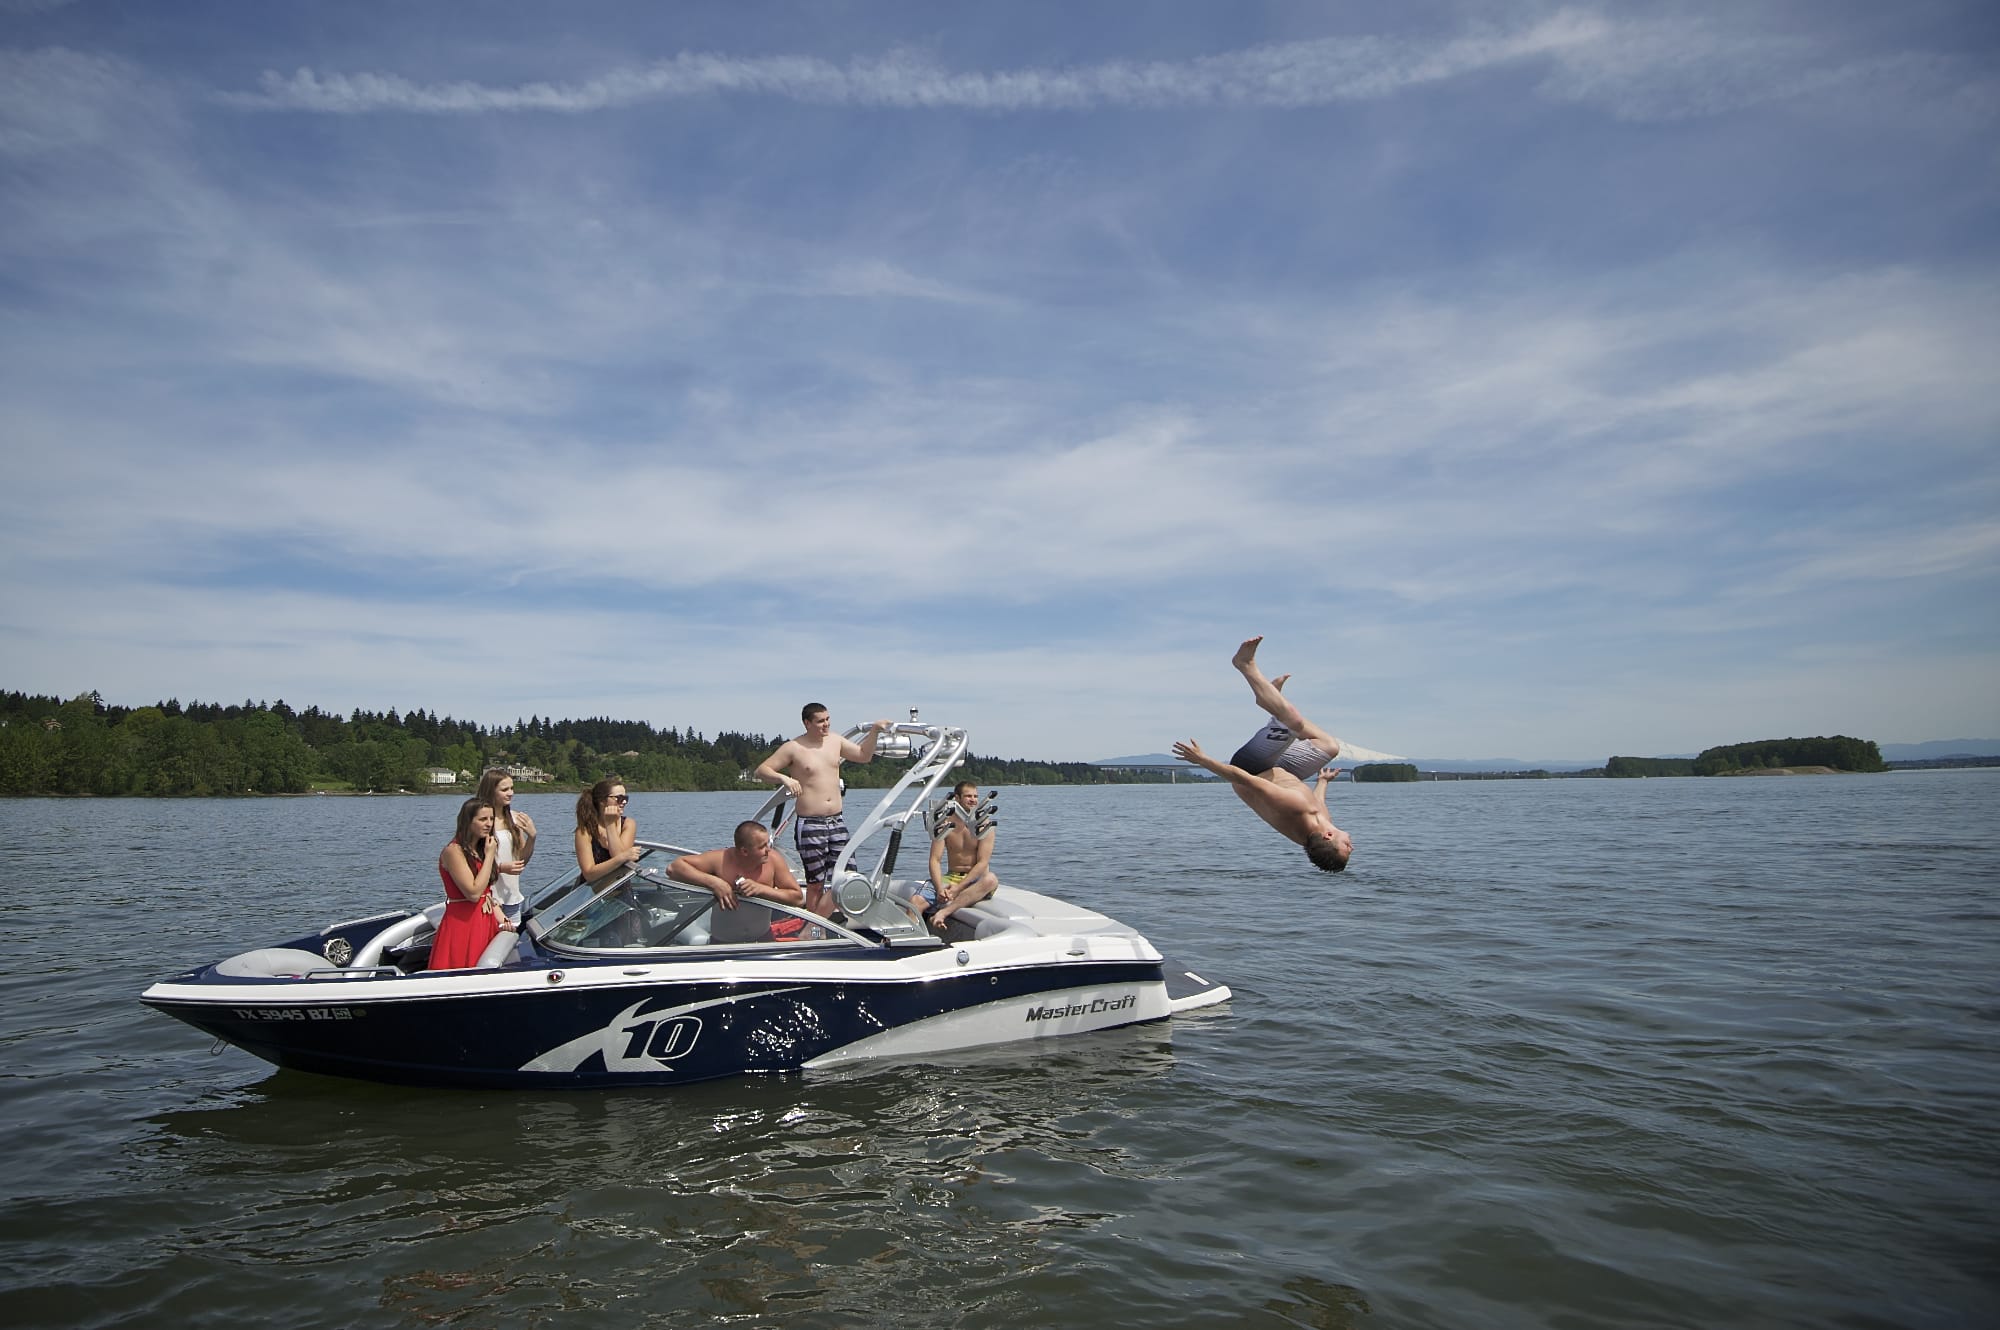 Oleg Babiy, 22, of Portland does a back flip off the back of a boat that was stopped on the Columbia River by the Clark County Sheriff's marine patrol boat for having out-of-state registration.